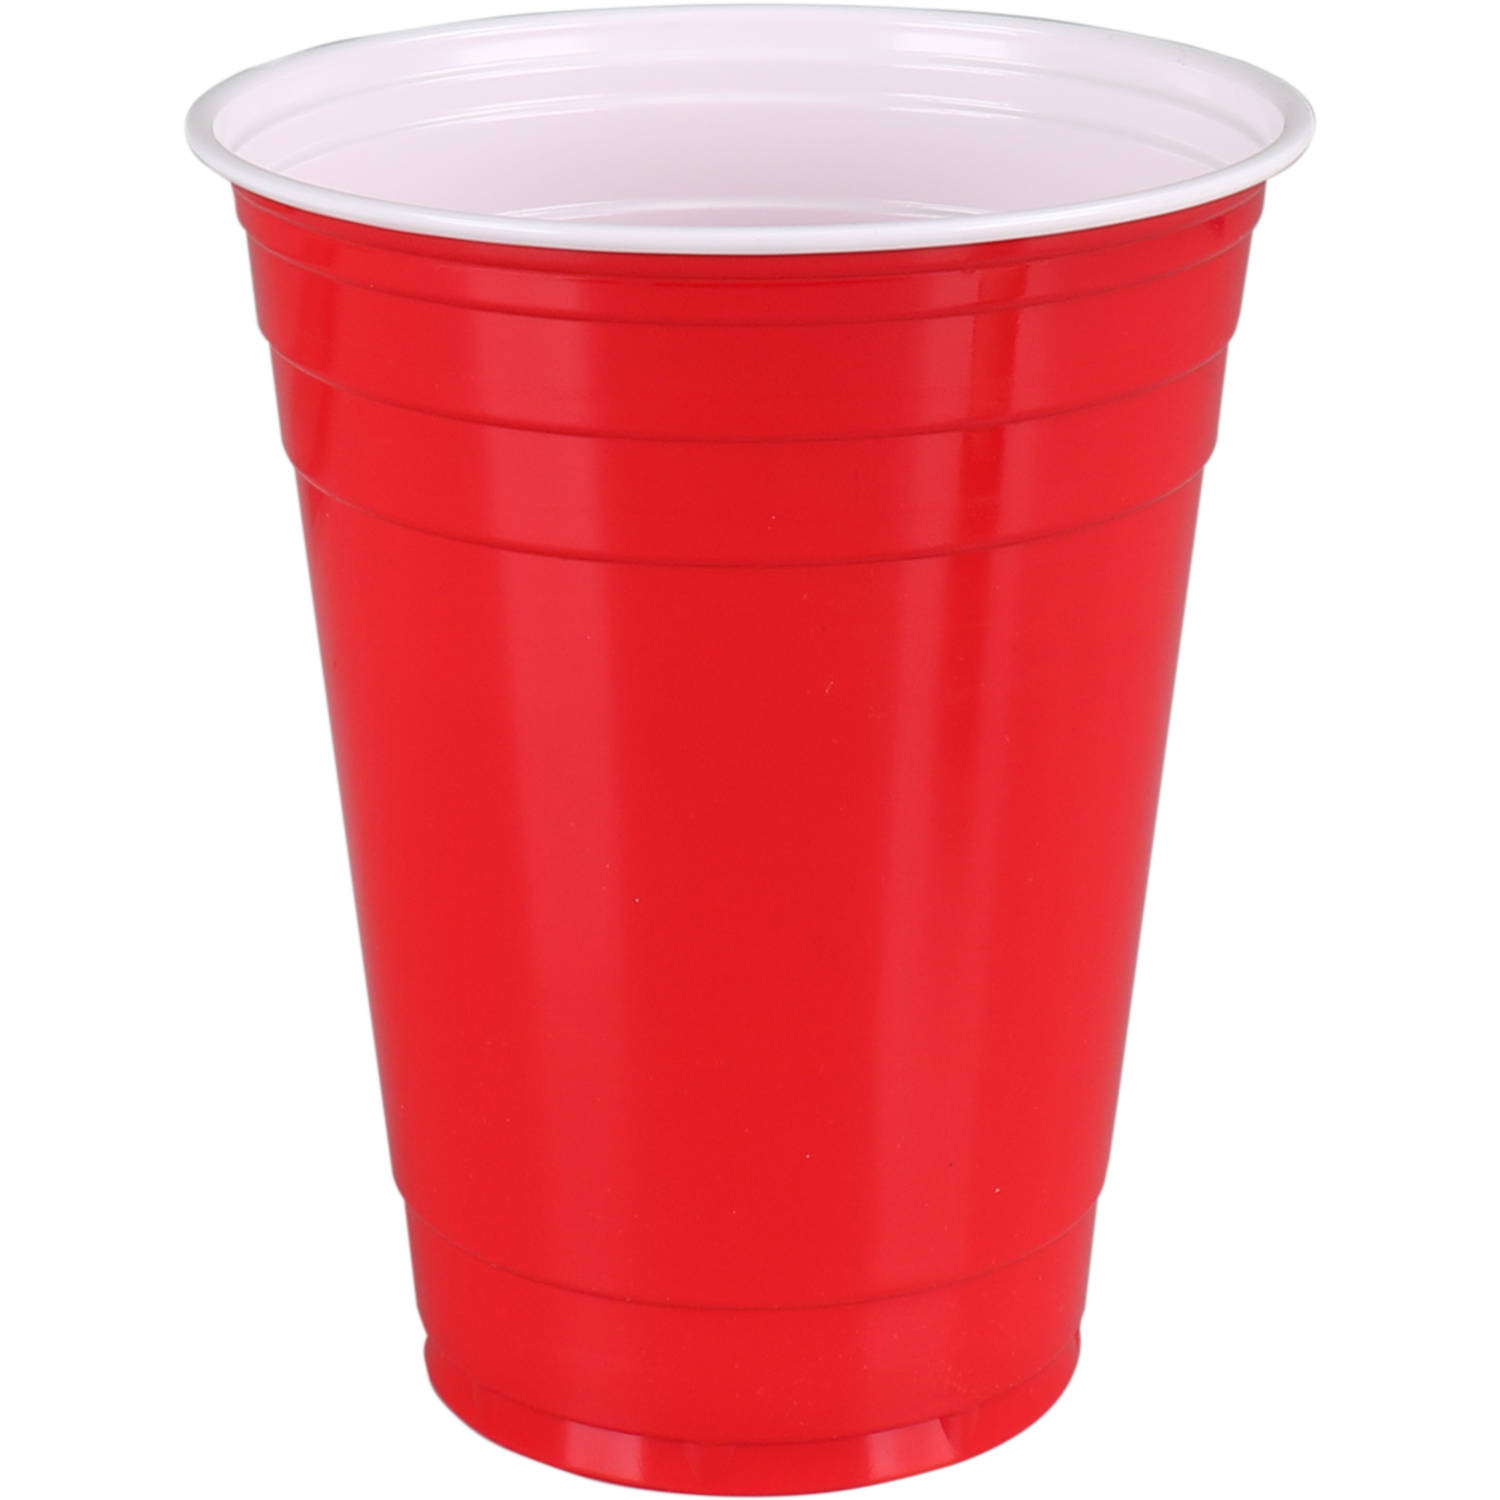 Party cup rood - 15x400ml